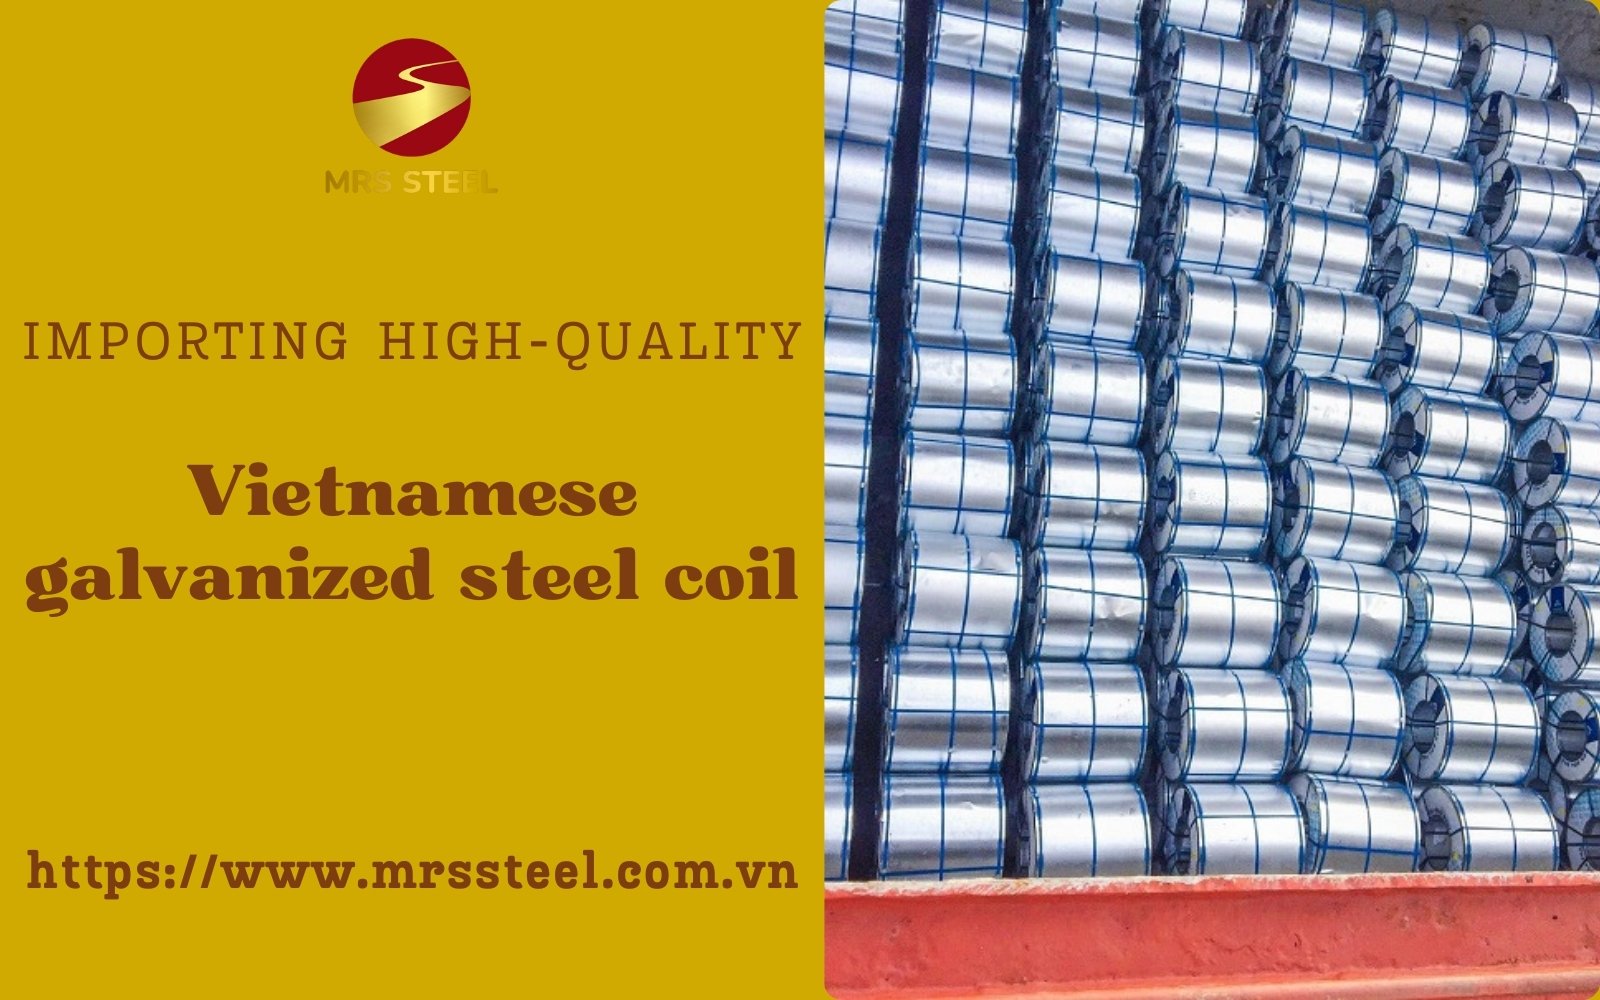 Importing high-quality galvanized steel coil from Vietnam